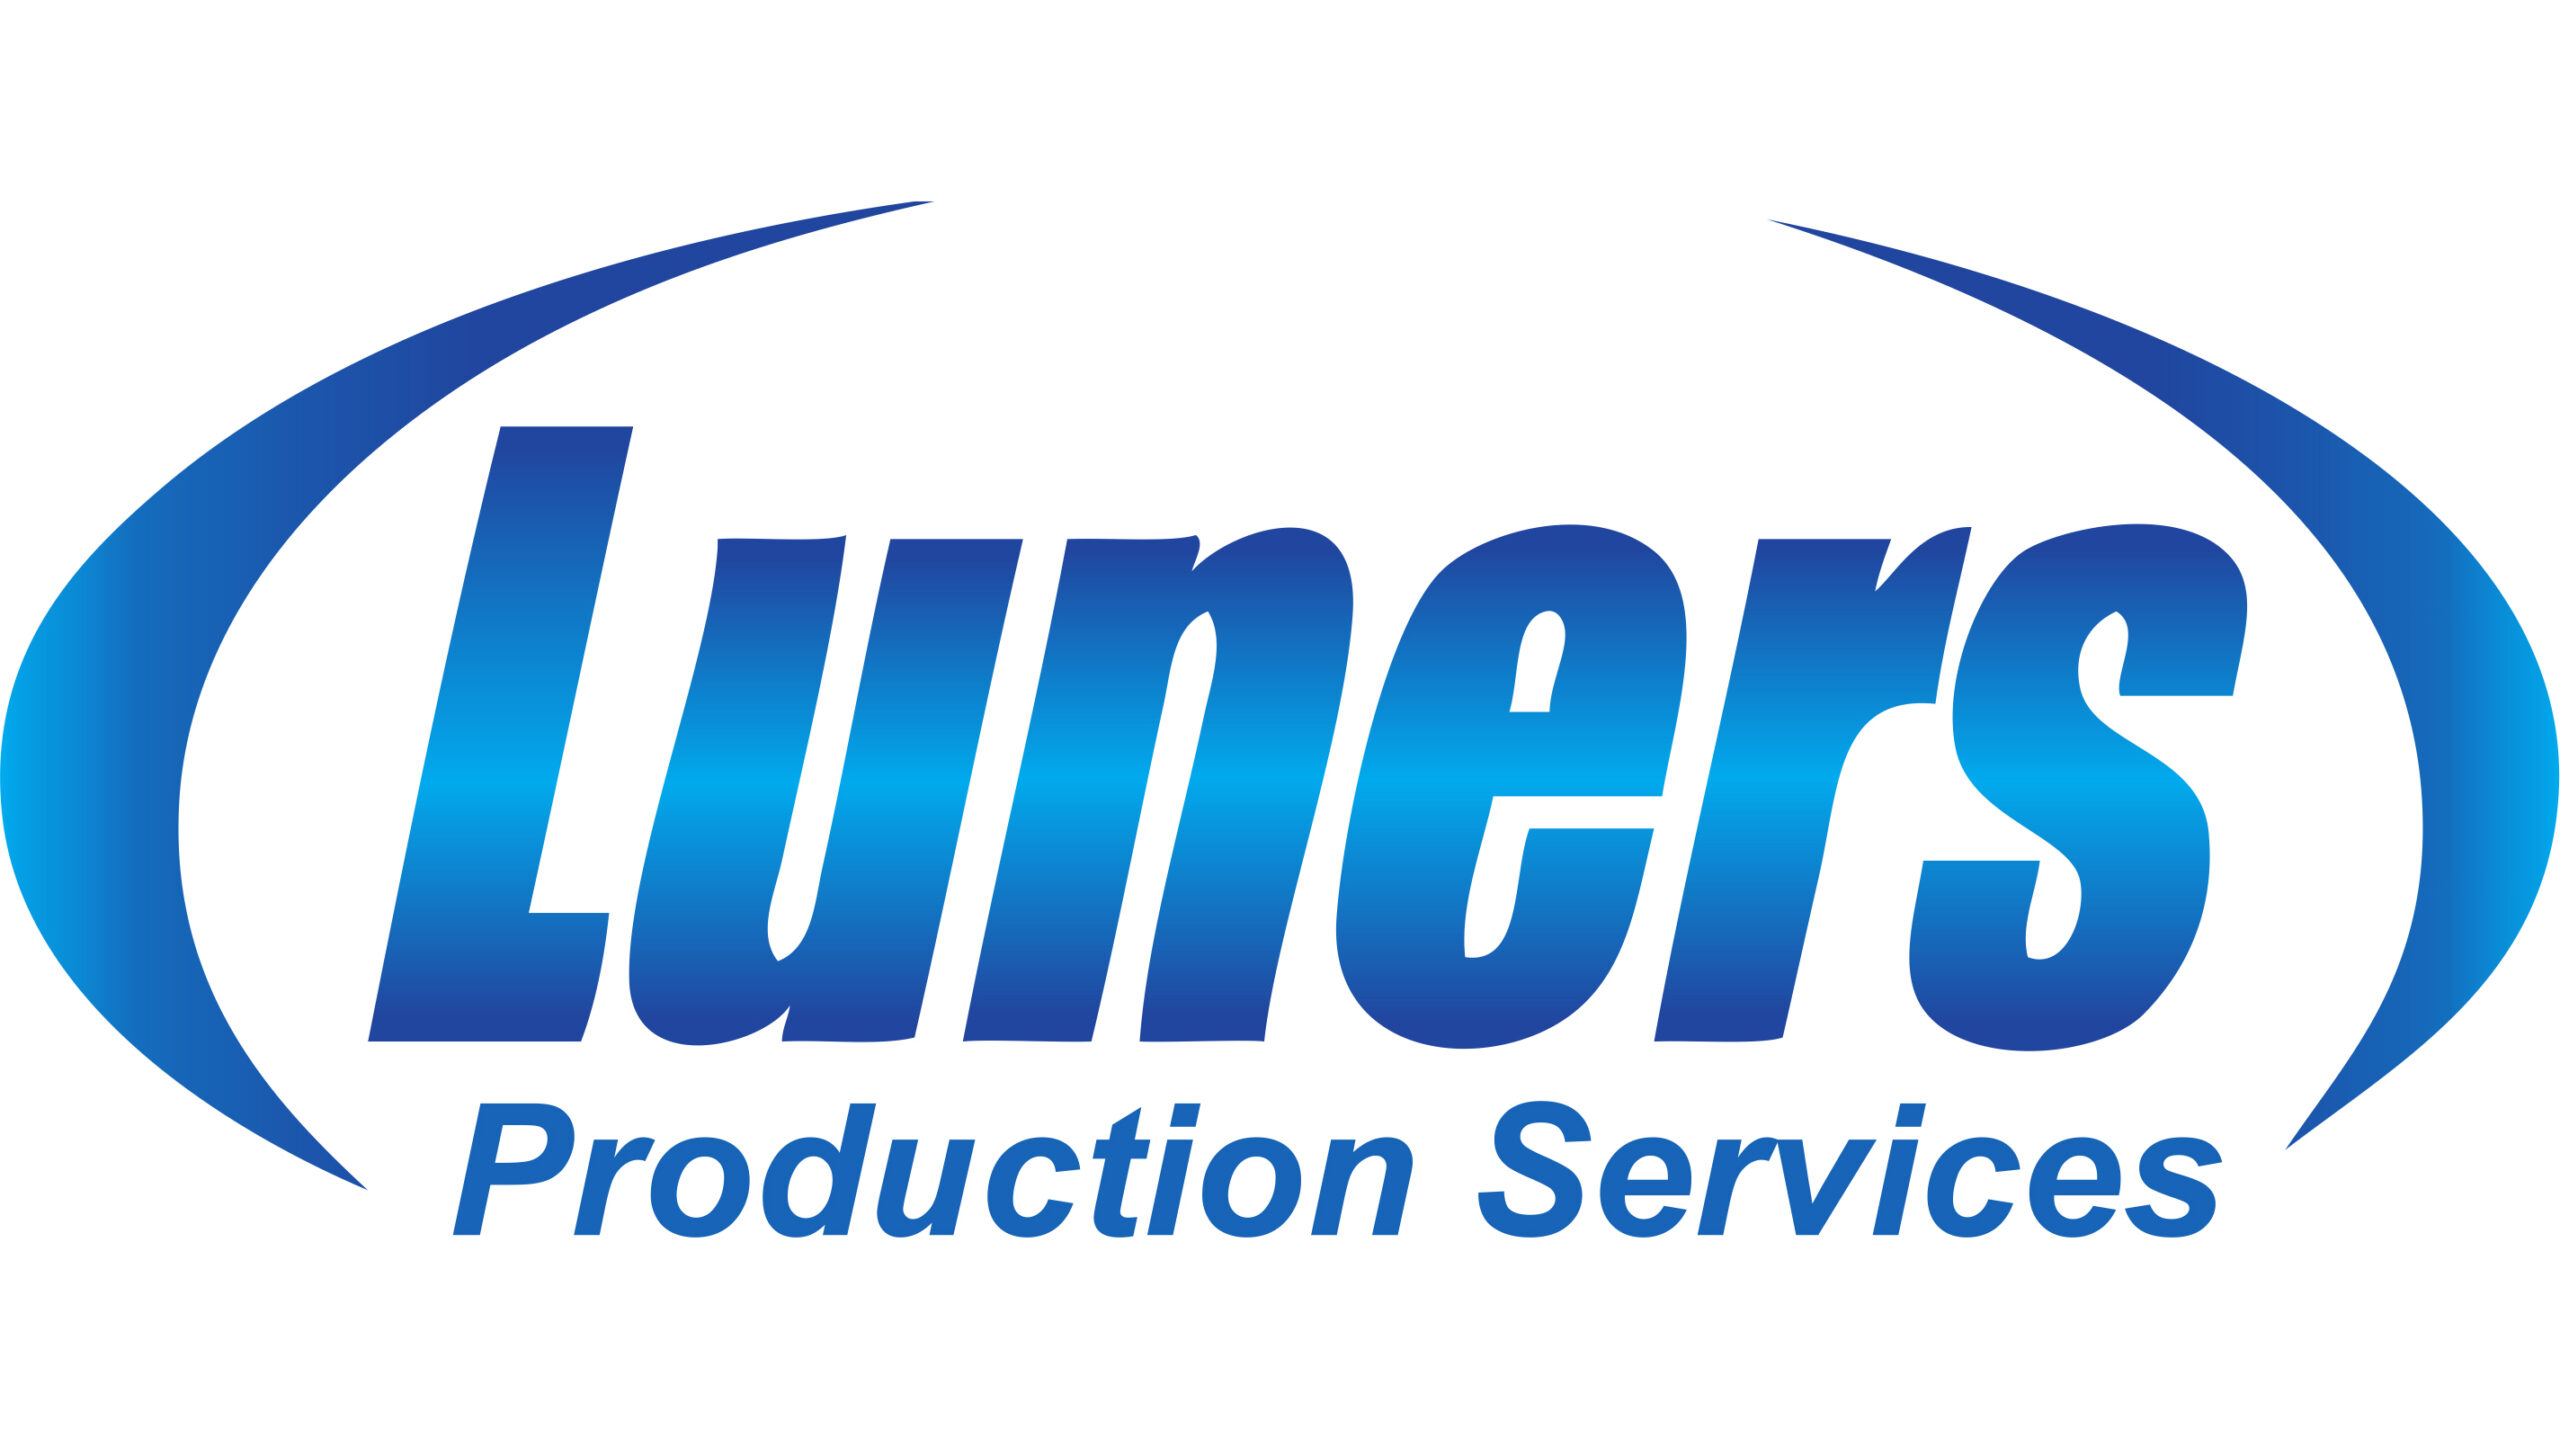 luners production services logo